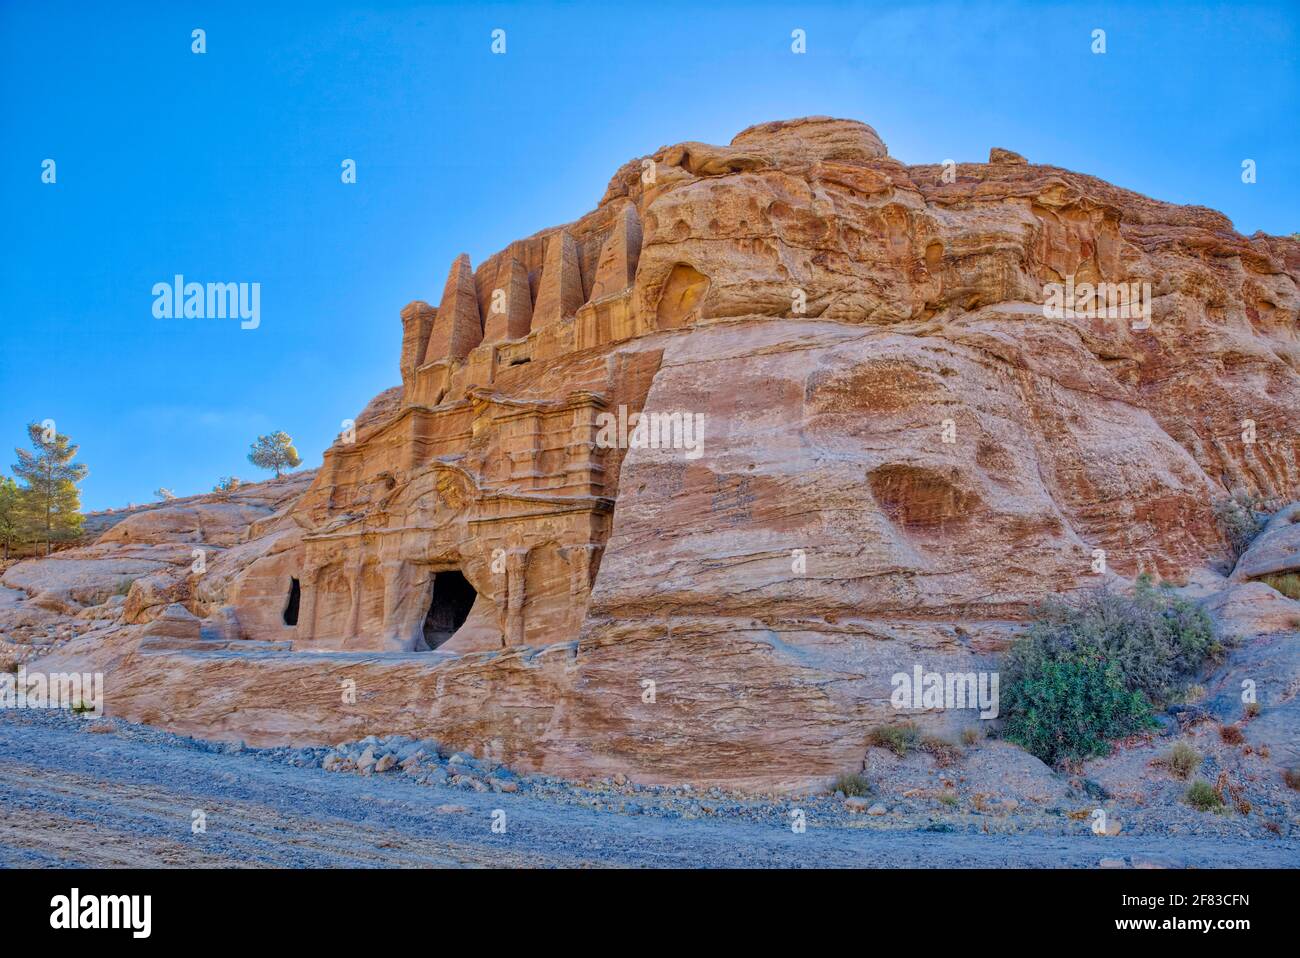 The Obelisk Tomb, a major Nabatean monument from the 1st century AD has four pyramidal obelisks (nephesh, in Nabataean Aramaic for “soul”) and a carve Stock Photo